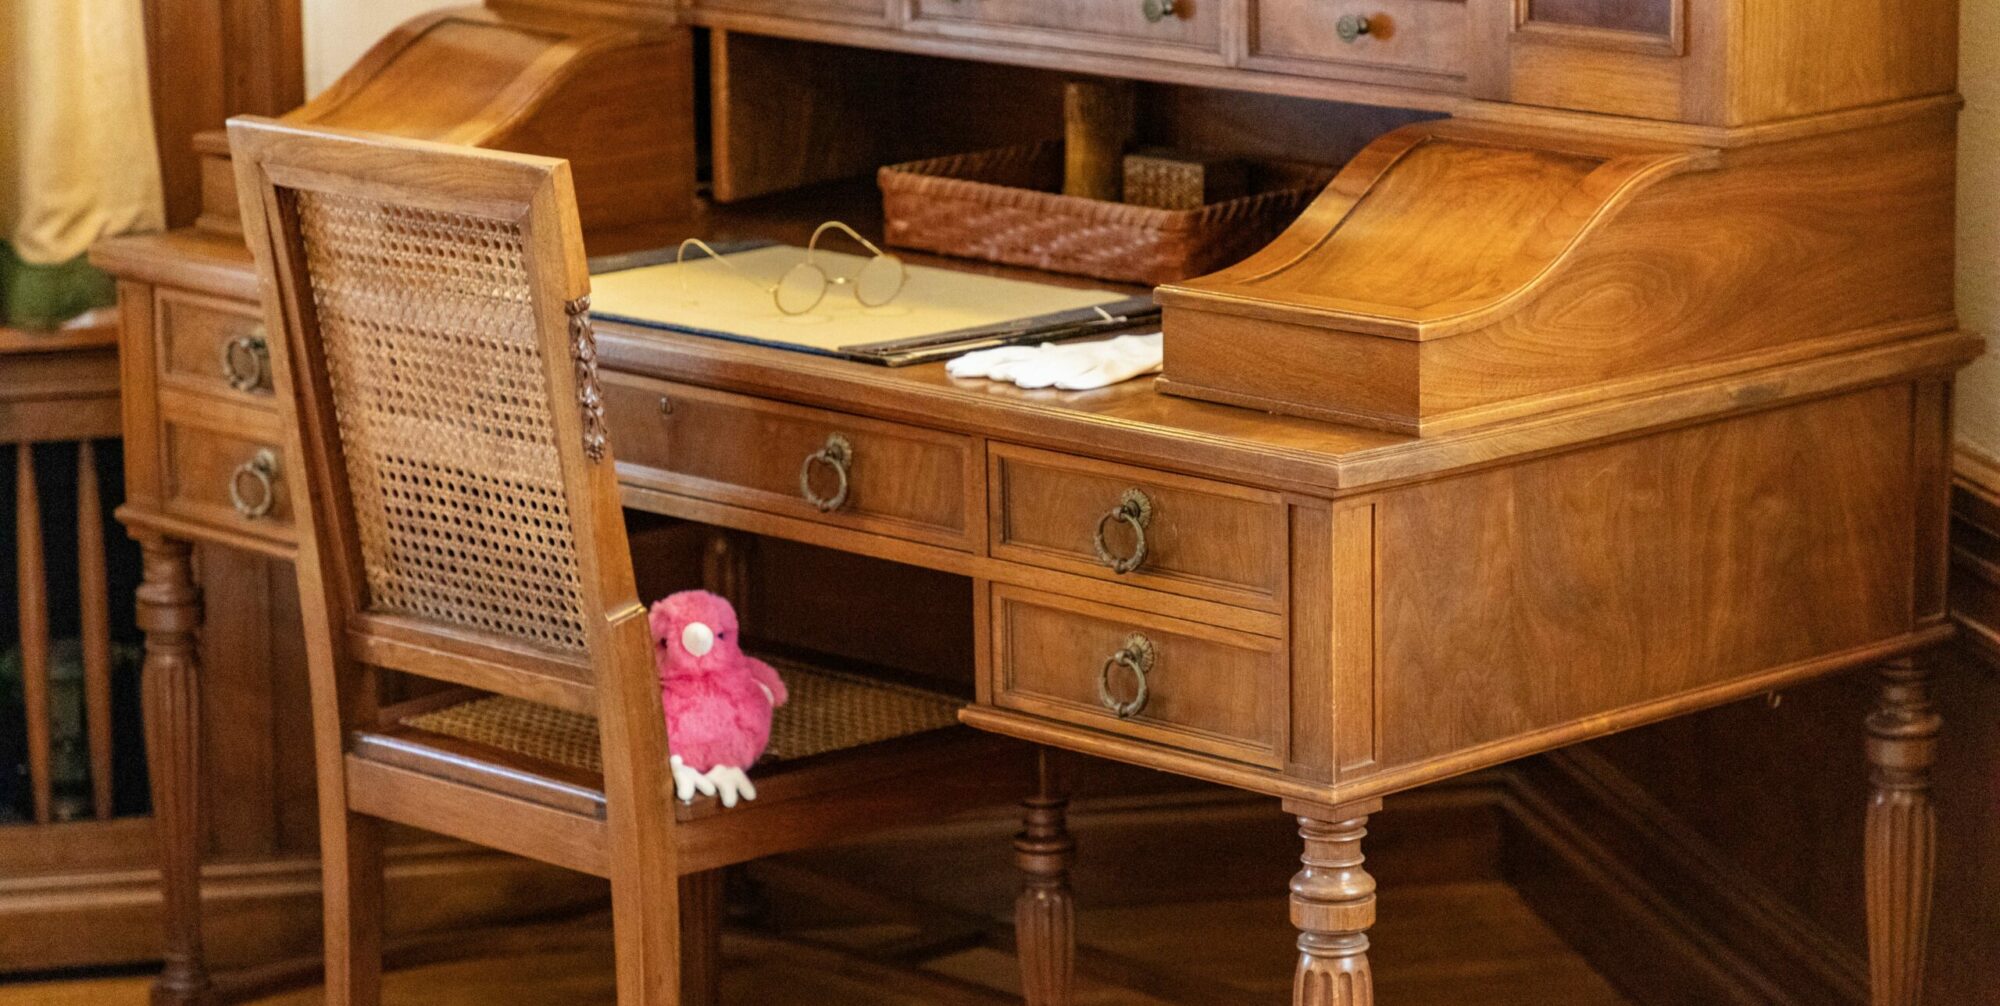 A picture of a brown wooden desk with a chair pulled up at it and a pink plush baby chick sitting on the chair.